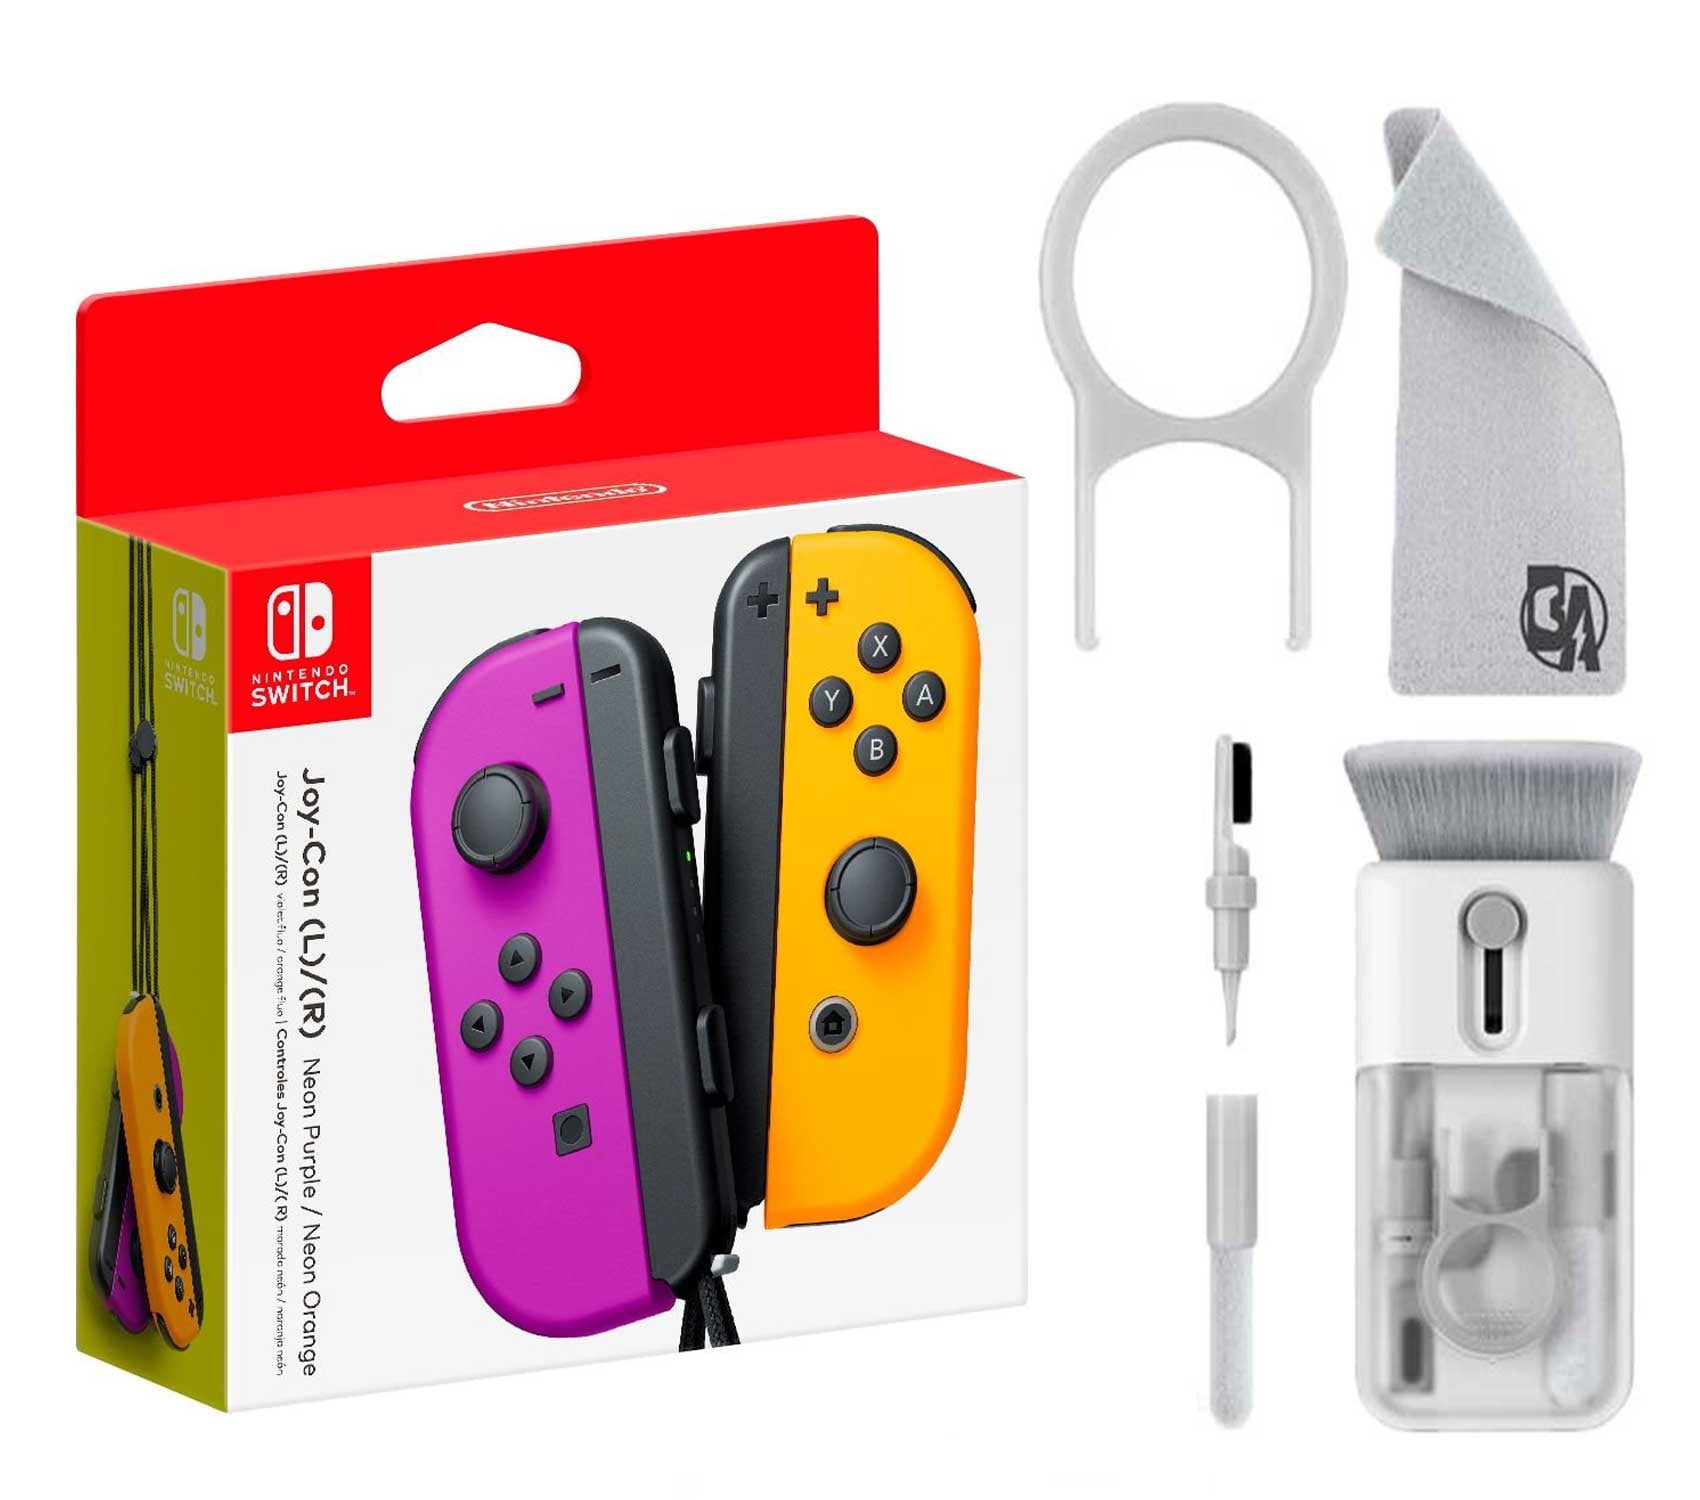 Pre-Owned Joy-Con (L/R) Wireless Controllers for Nintendo Switch - Neon  Purple/Neon Orange With Cleaning Electric kit Bolt Axtion Bundle